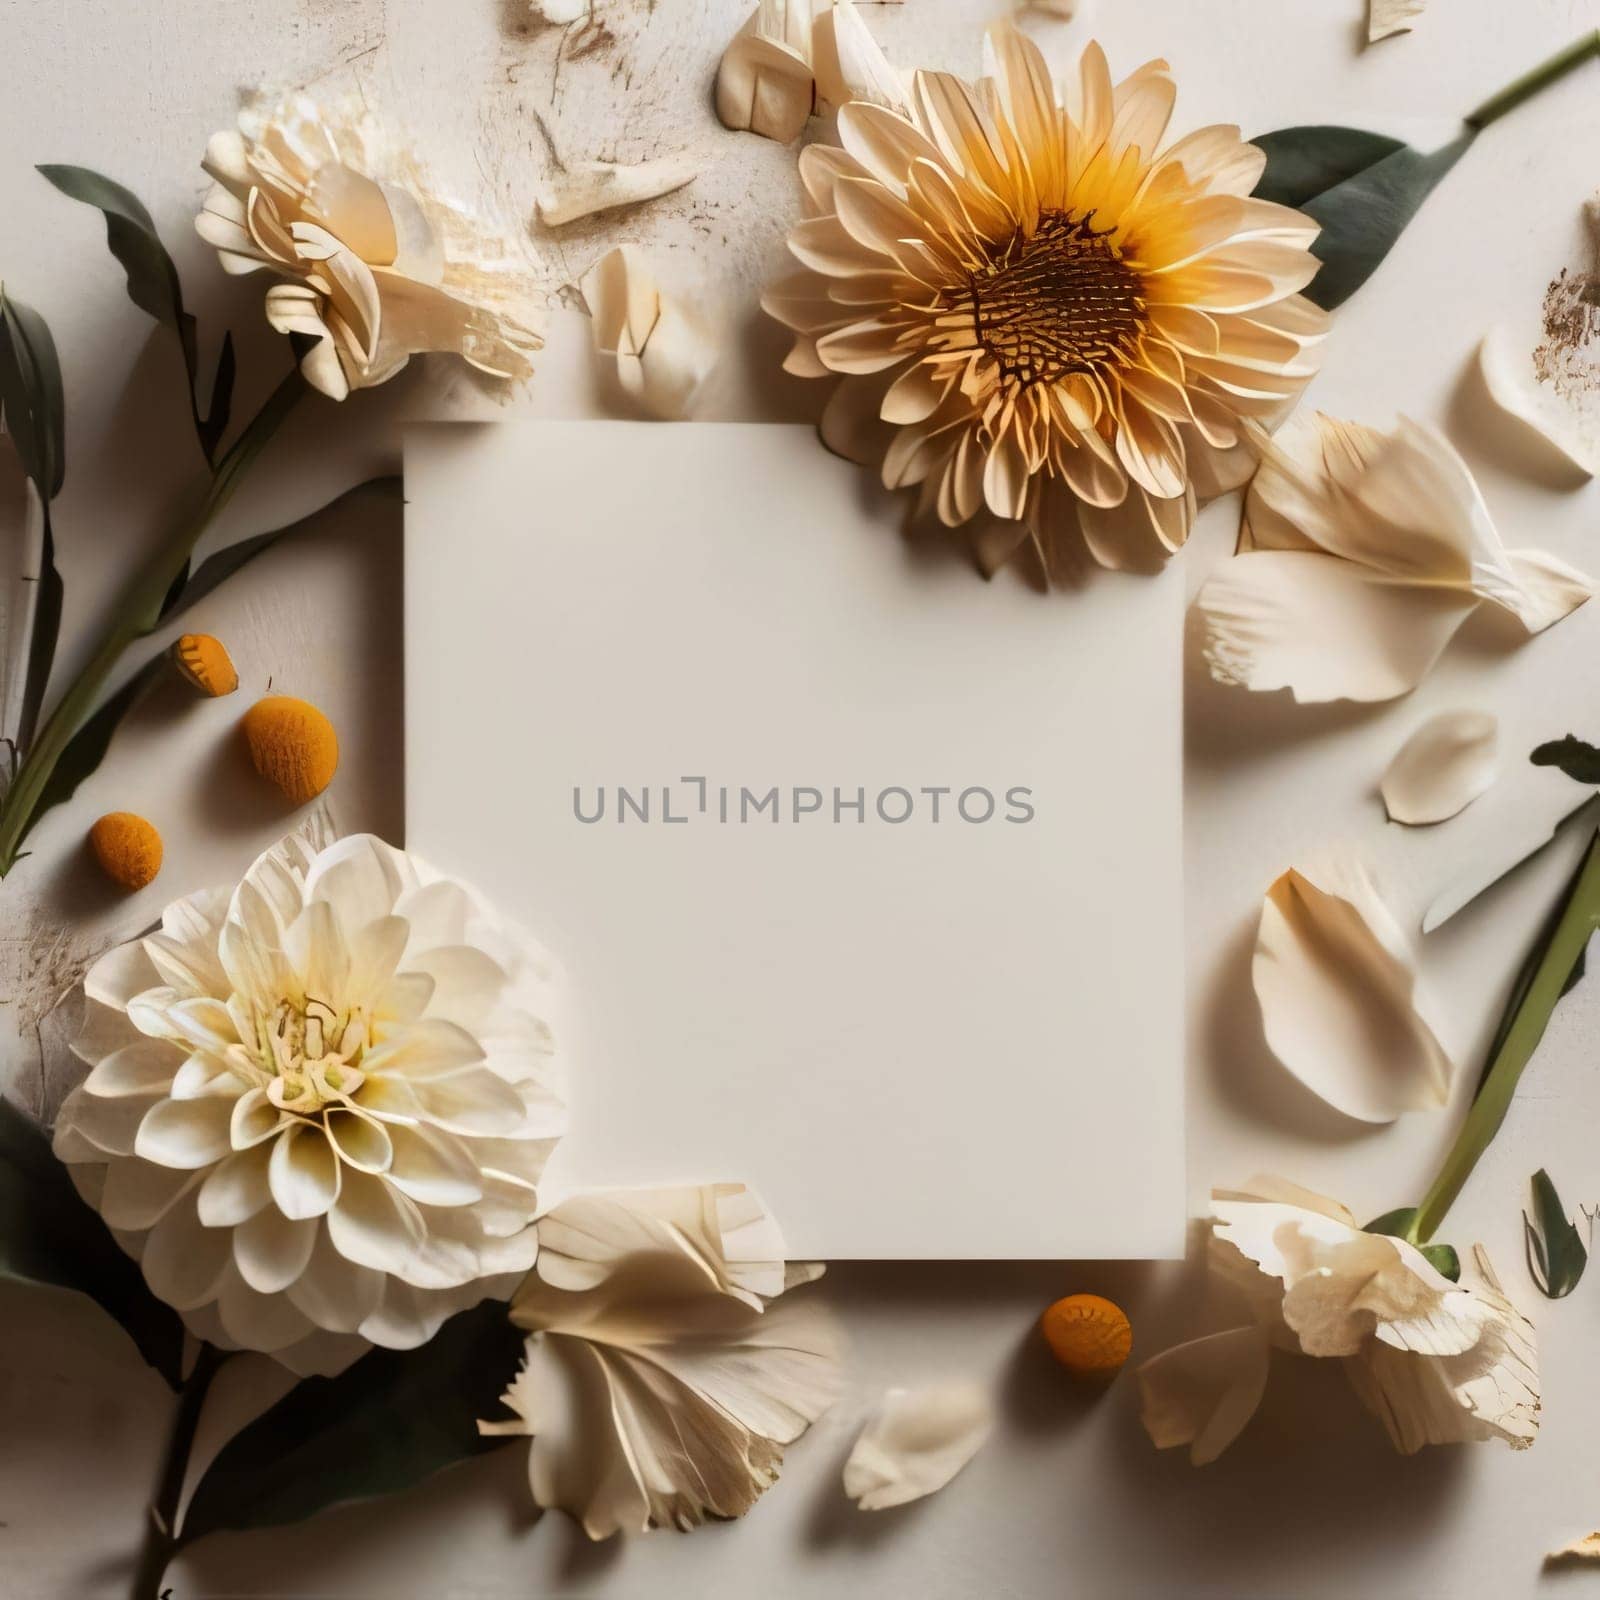 White blank card on a white background around scattered white flower petals. Places on their own content. Flowering flowers, a symbol of spring, new life. A joyful time of nature waking up to life.